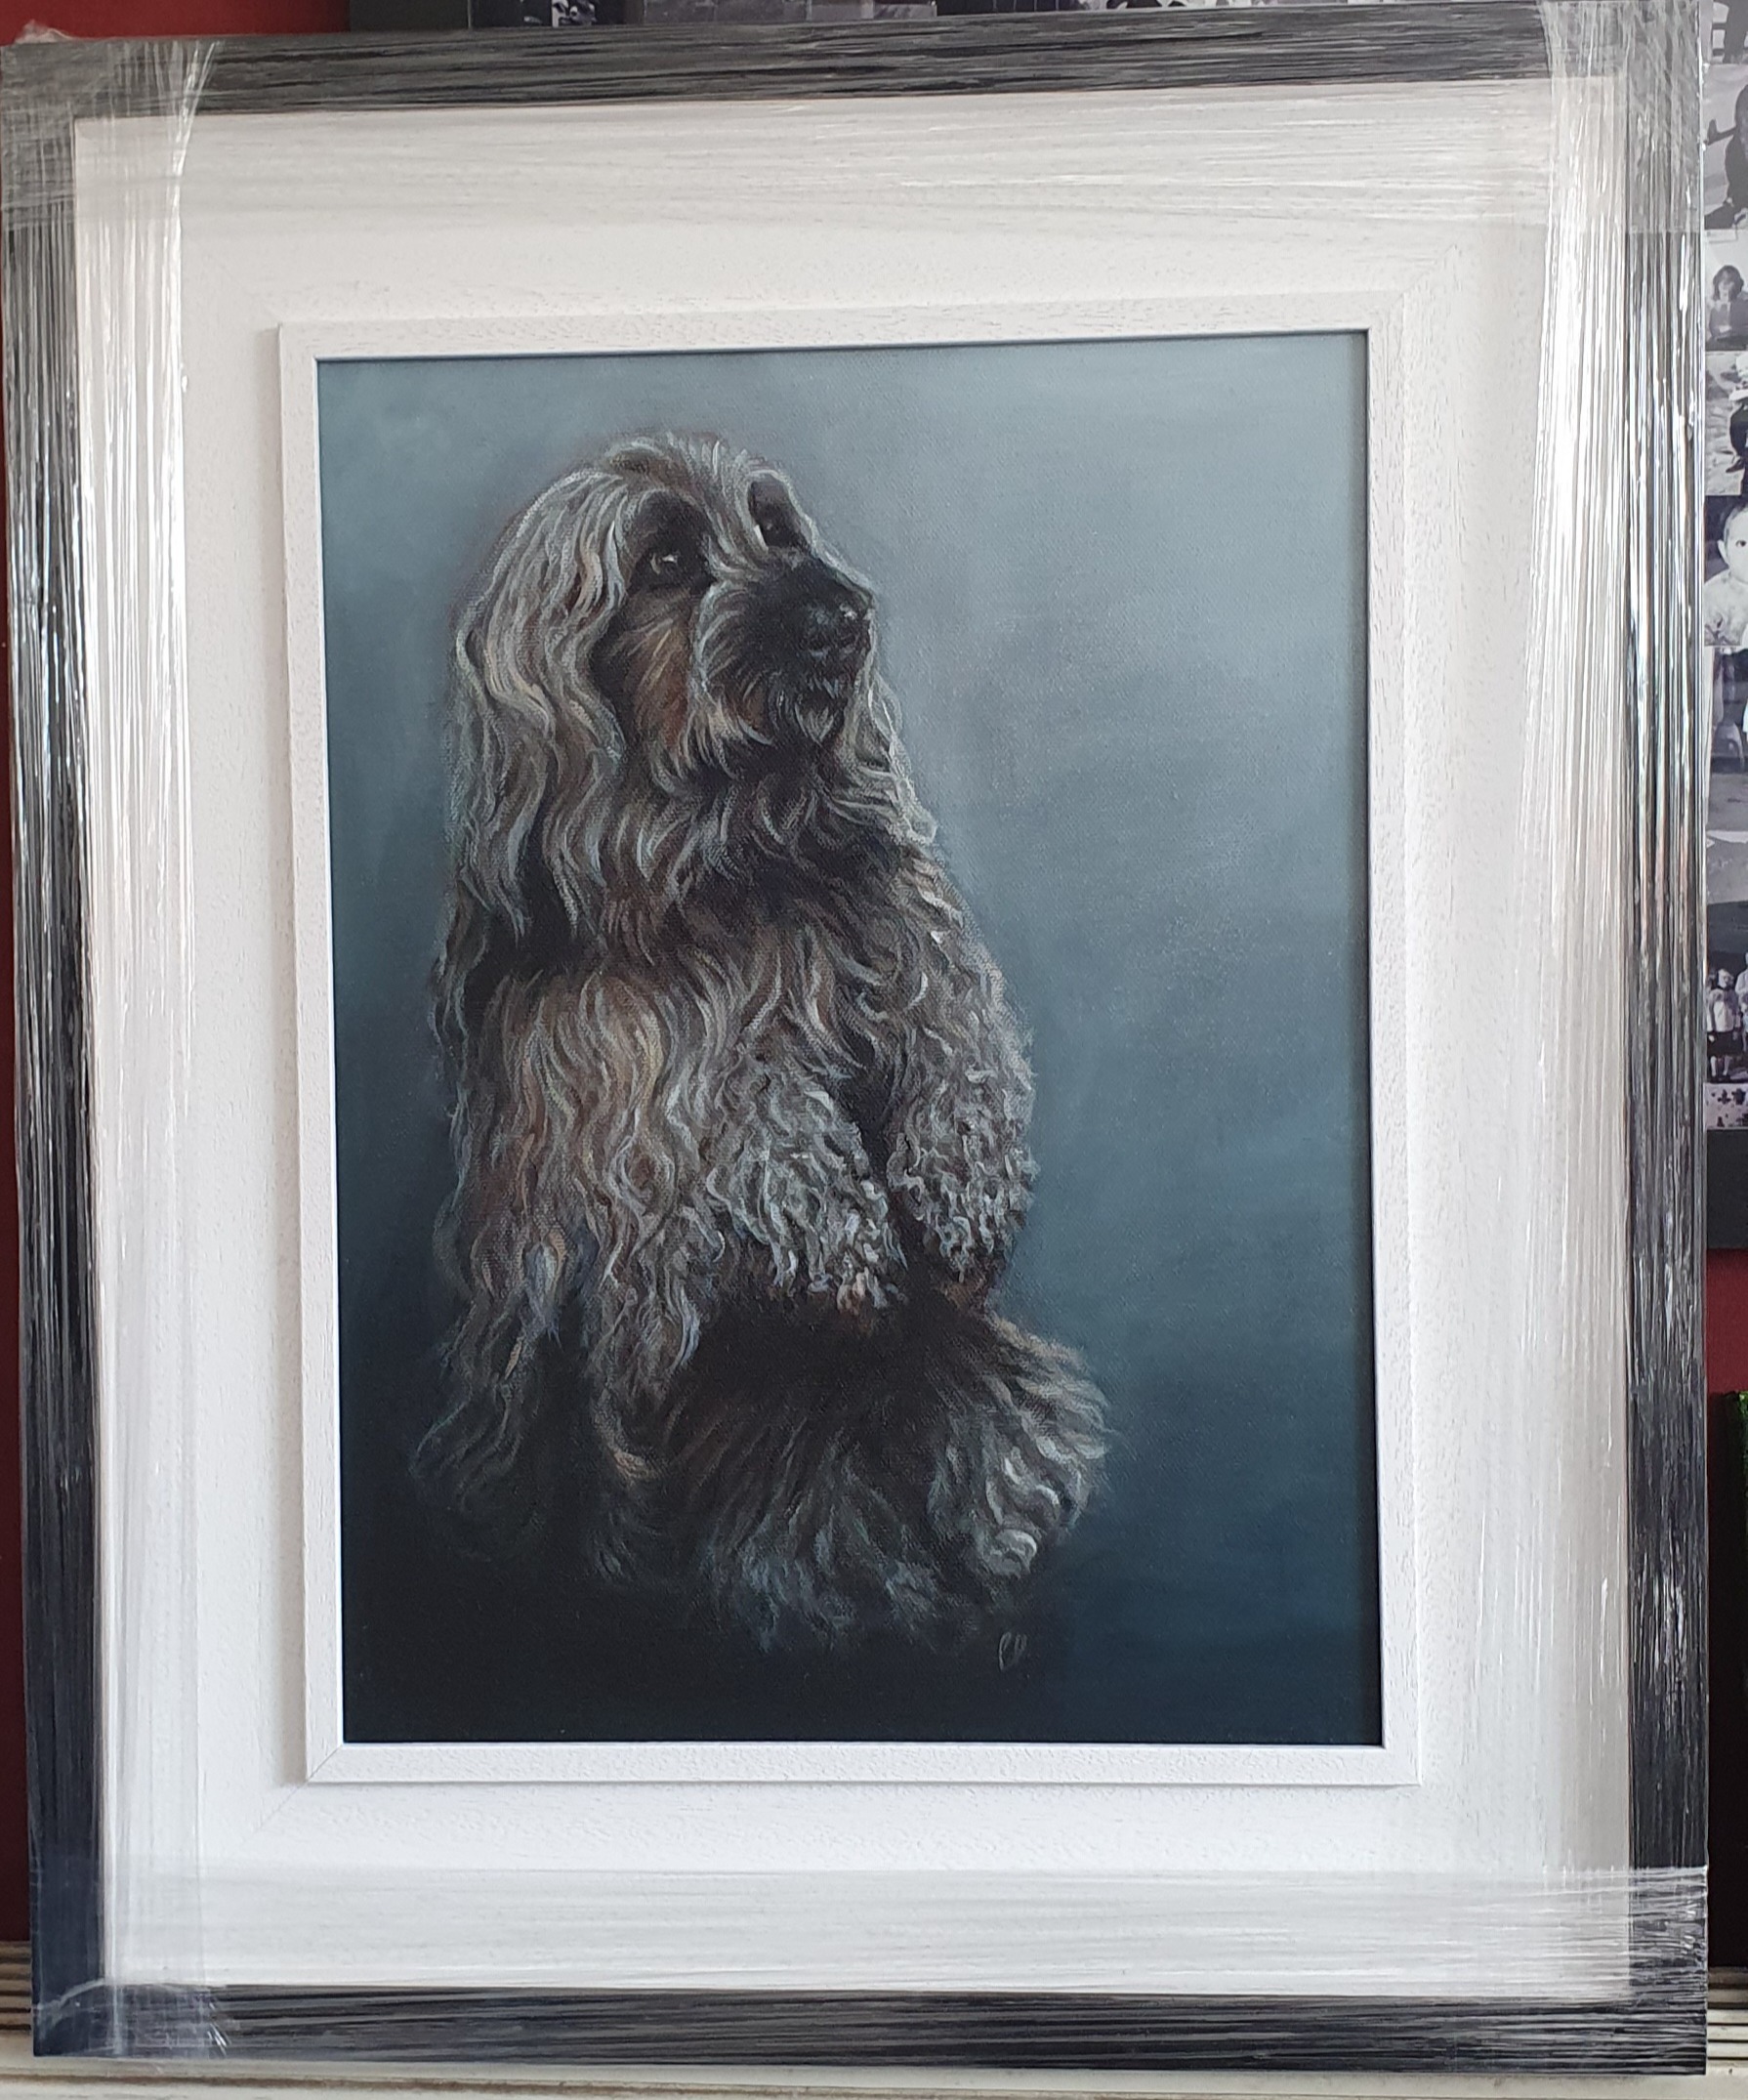 30 x 40cm oil Painting professionally framed